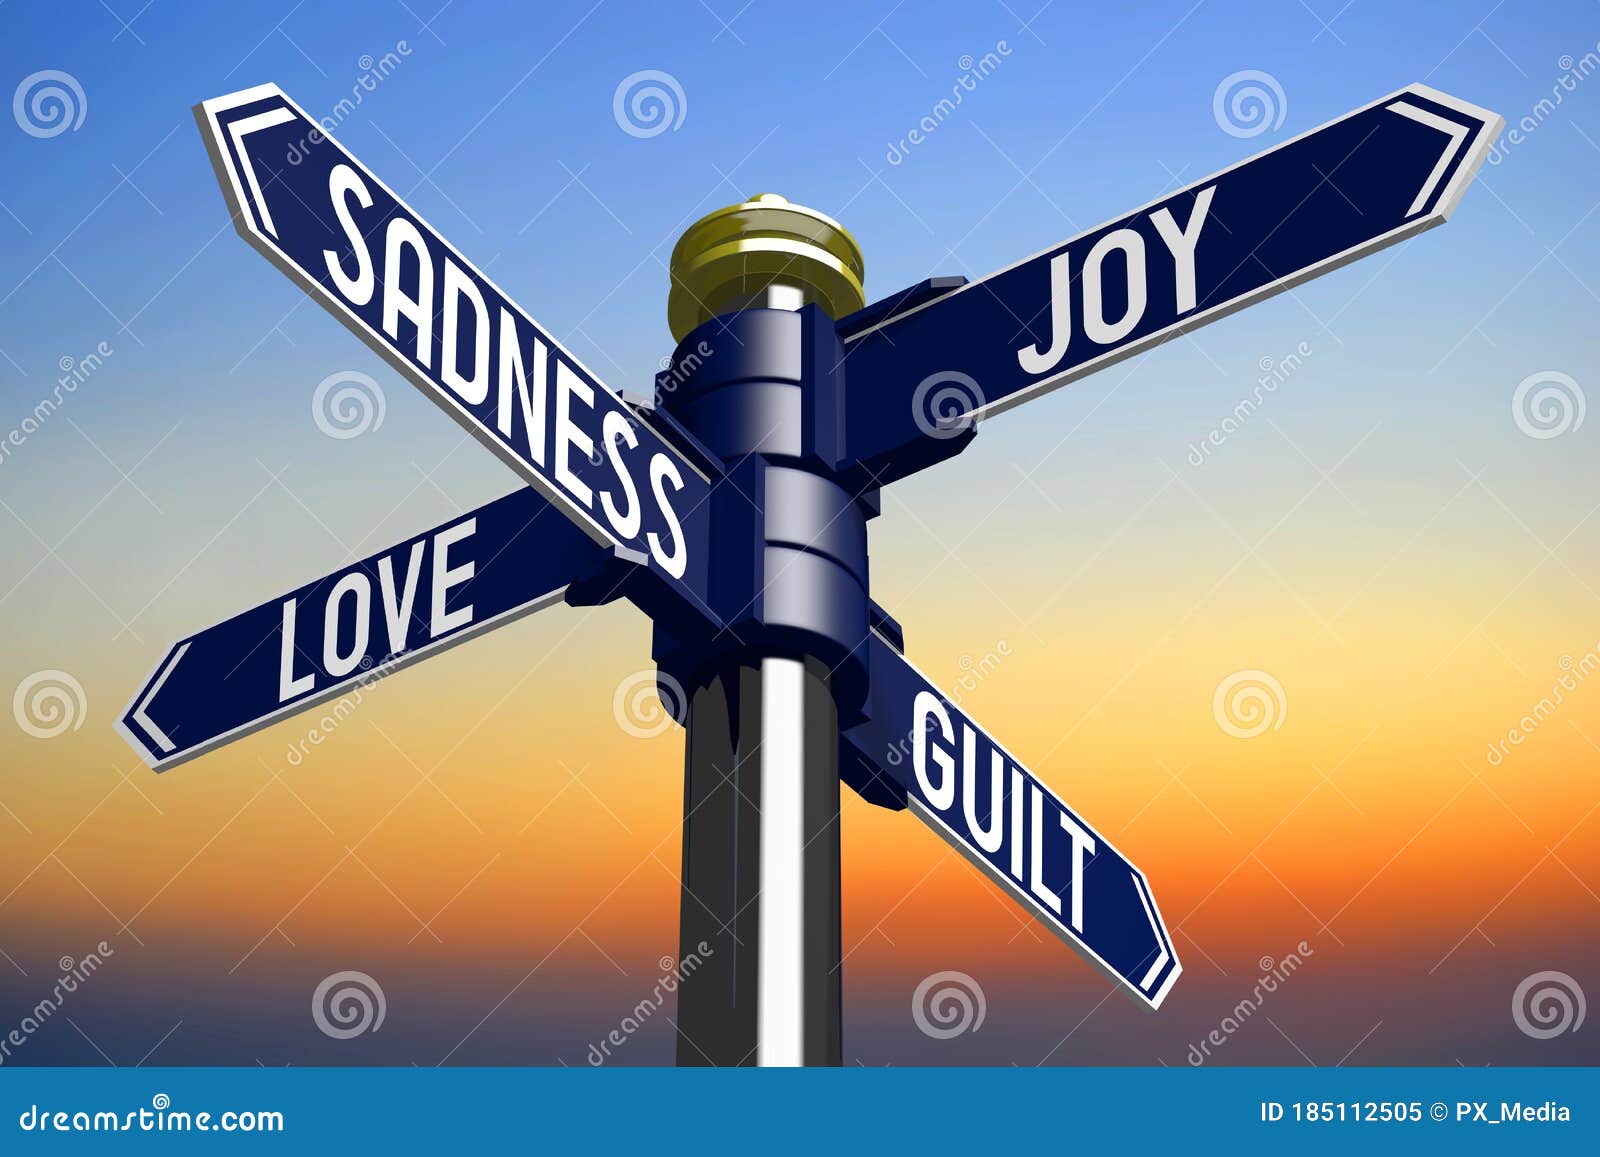 joy, sadness, love, guilt - signpost with four arrows - emotions0